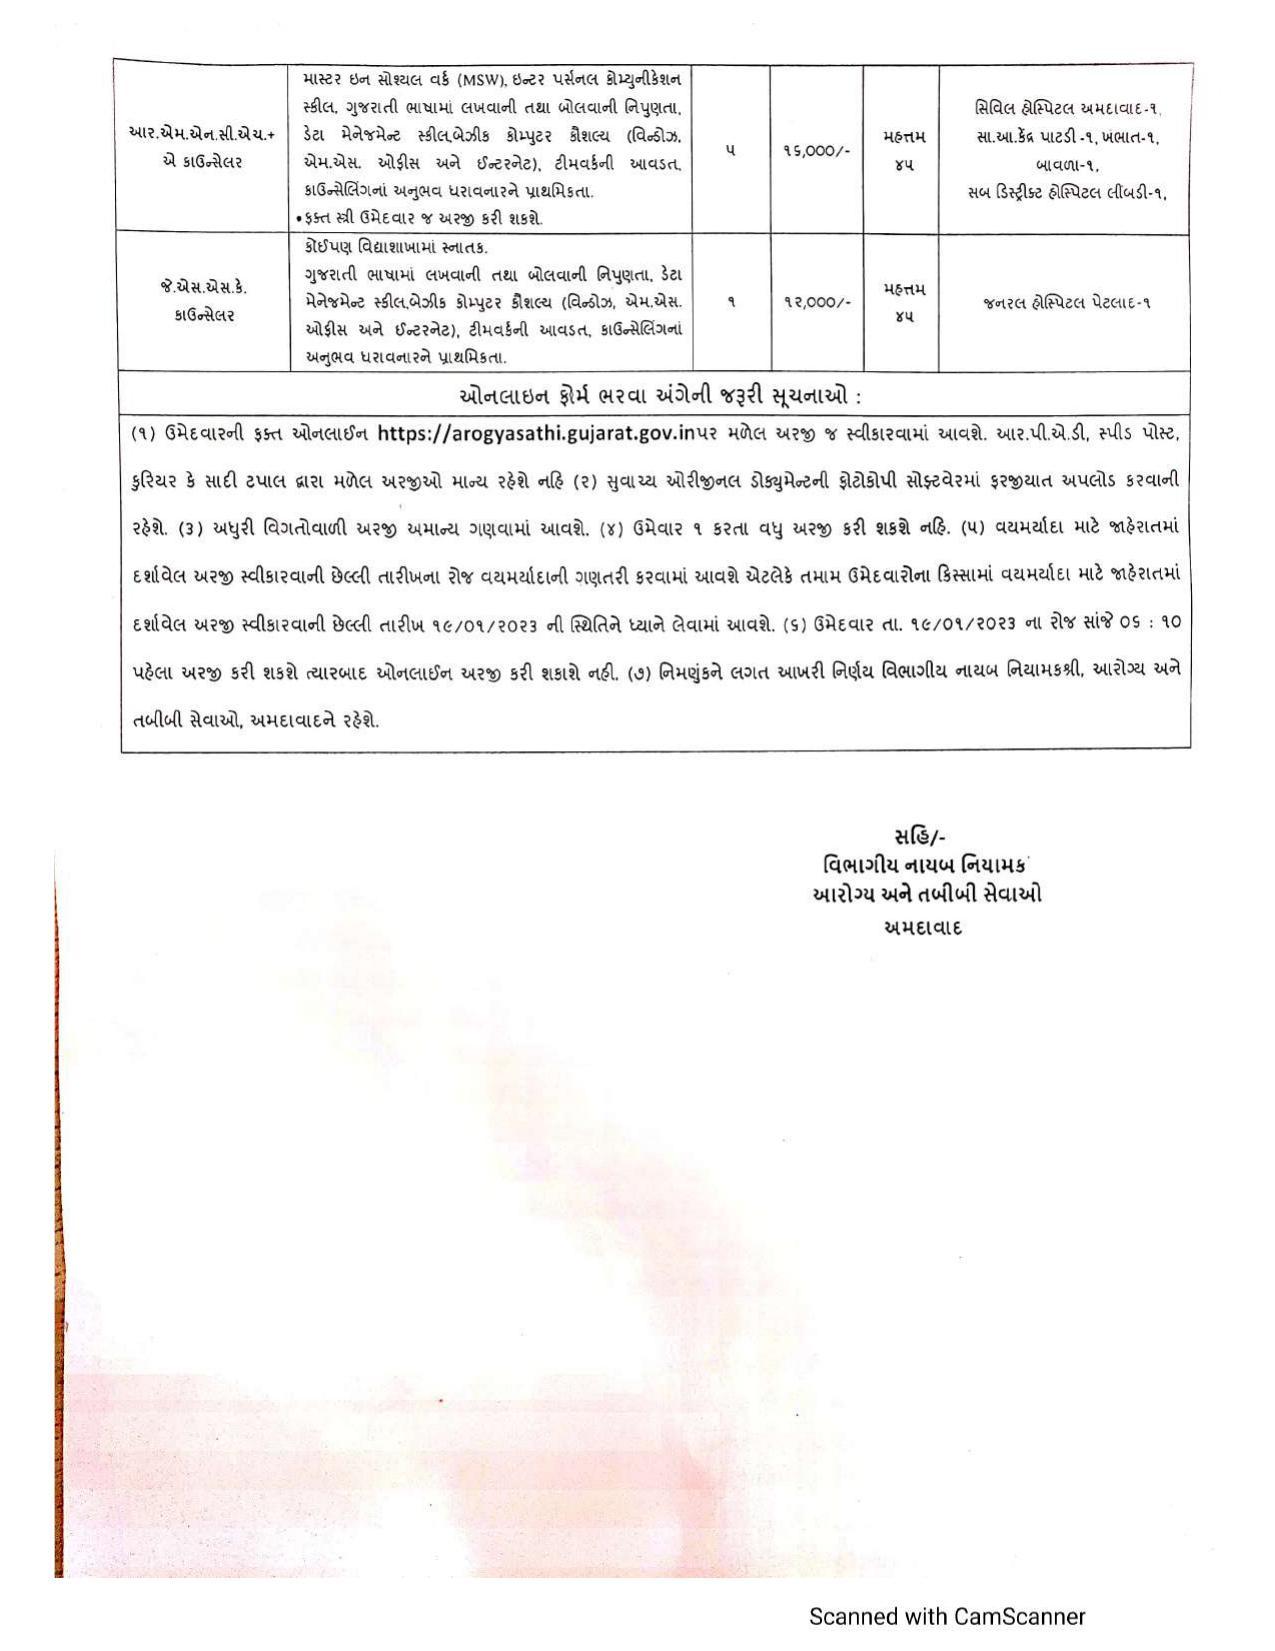 Health and Family Welfare Department Gujarat Invites Application for Regional Deputy Director Recruitment 2023 - Page 1